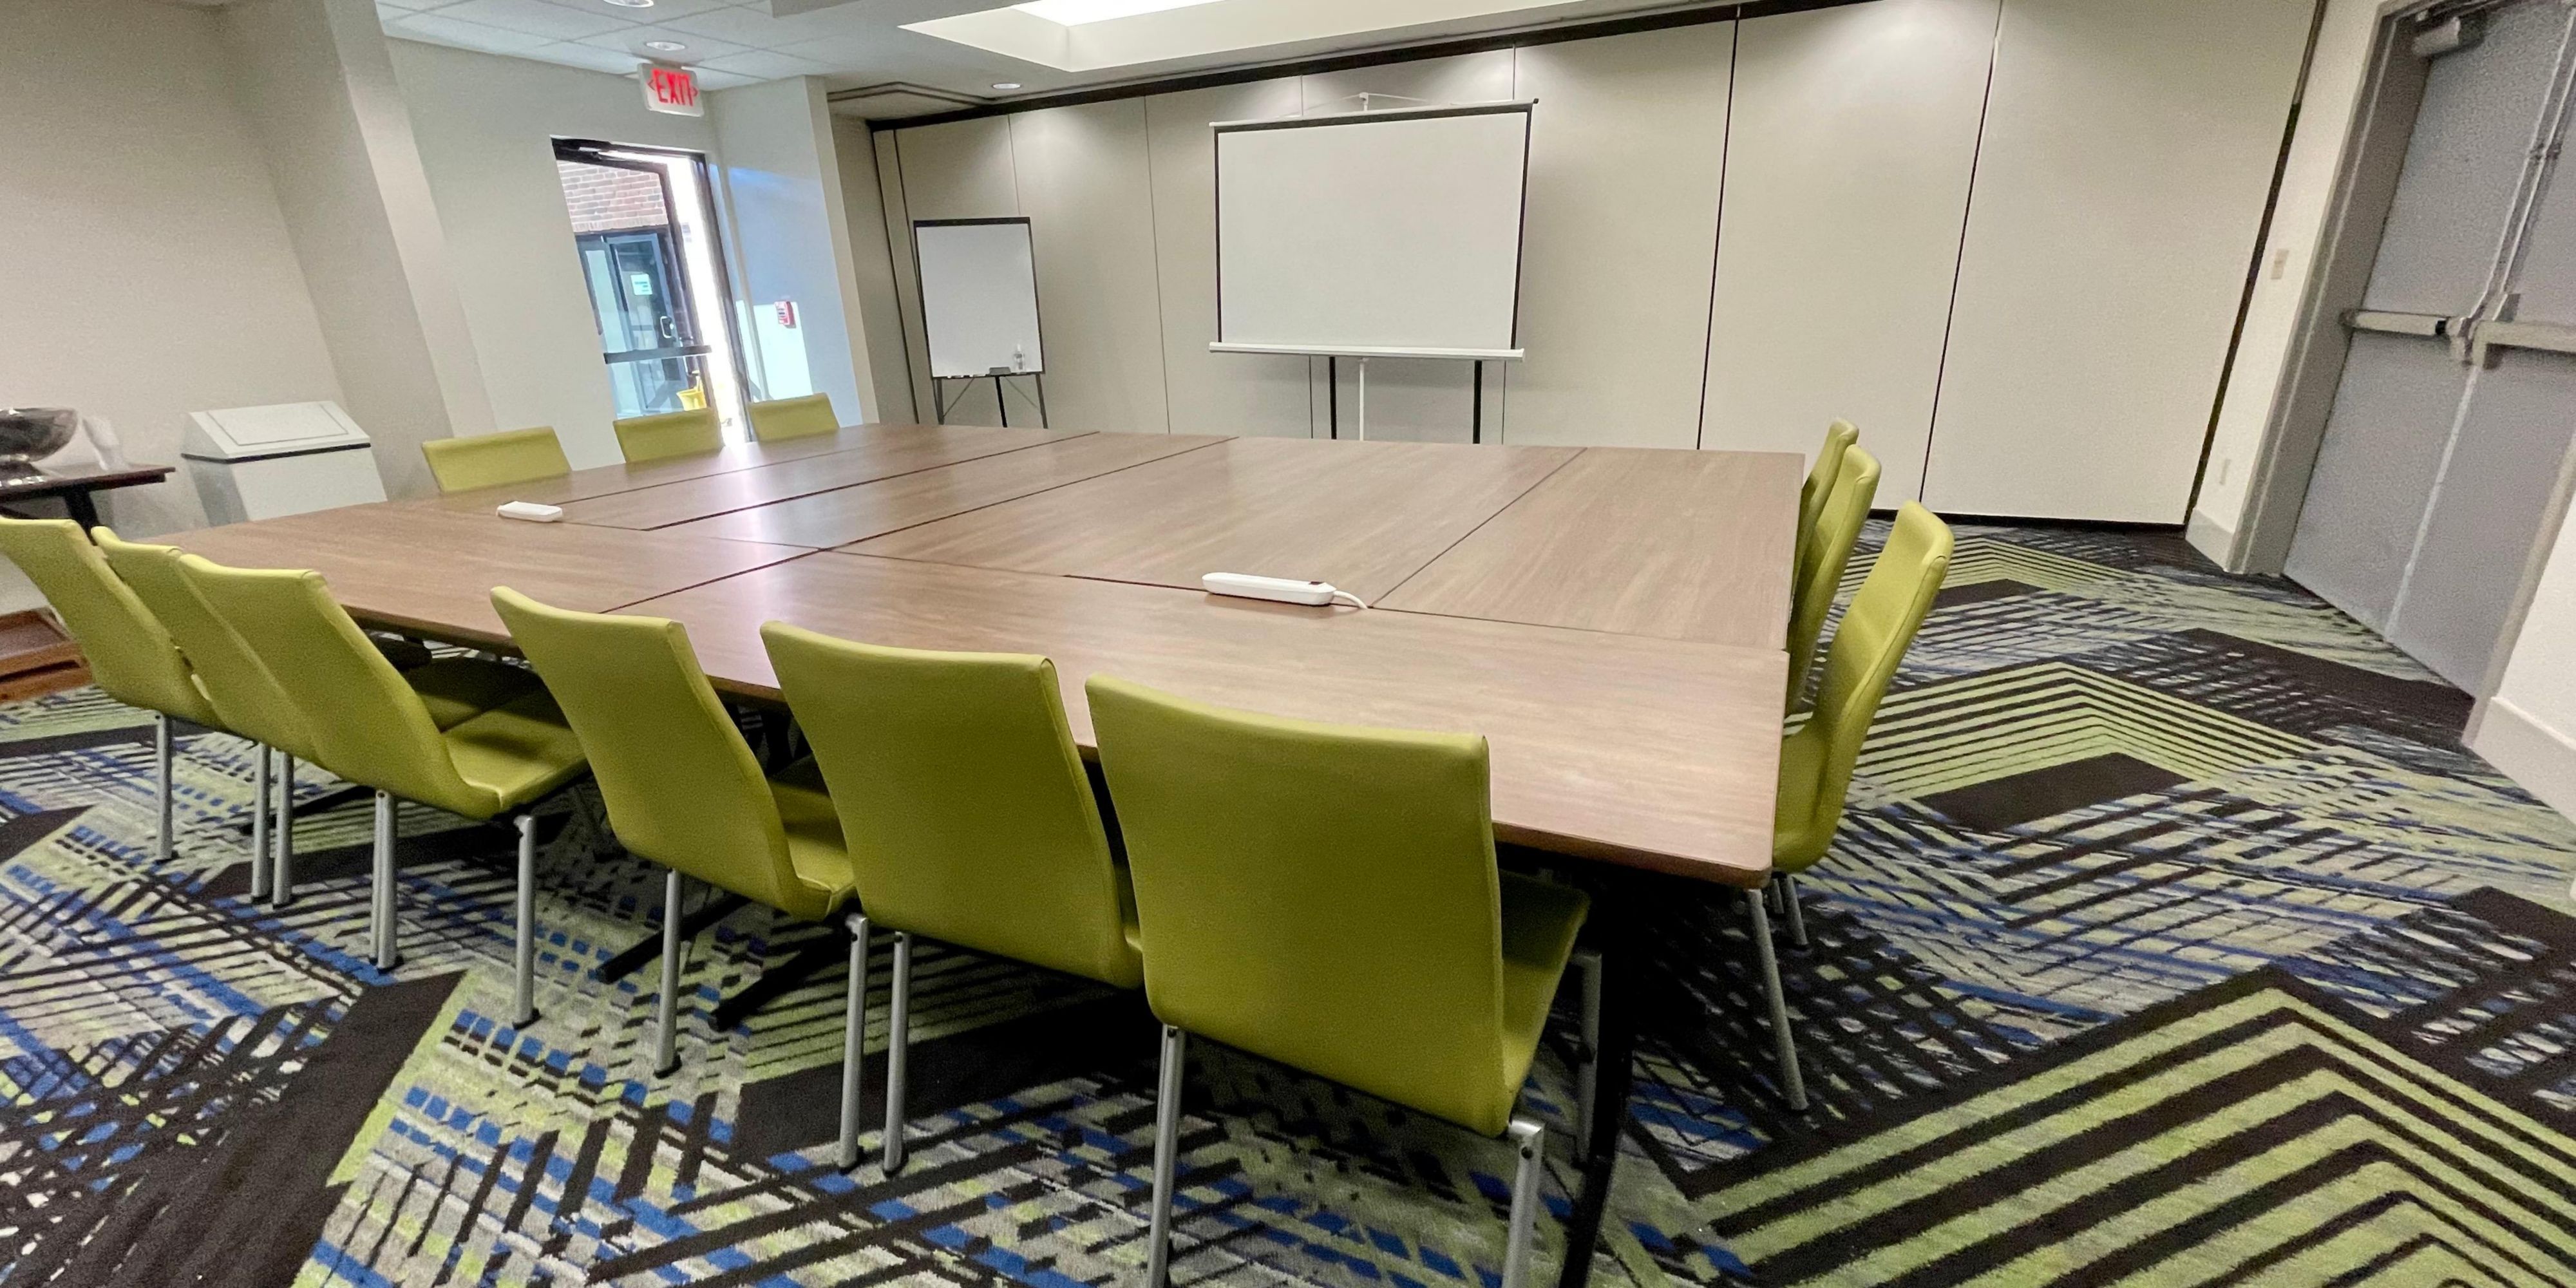 Hosting a business or social event in the Sulphur/ Lake Charles area? We offer a 1,138-square-foot contemporary space, event planning, and catering. The room can be divided into two smaller rooms for networking and breakout sessions. Capable of accommodating up to 120 guests. 